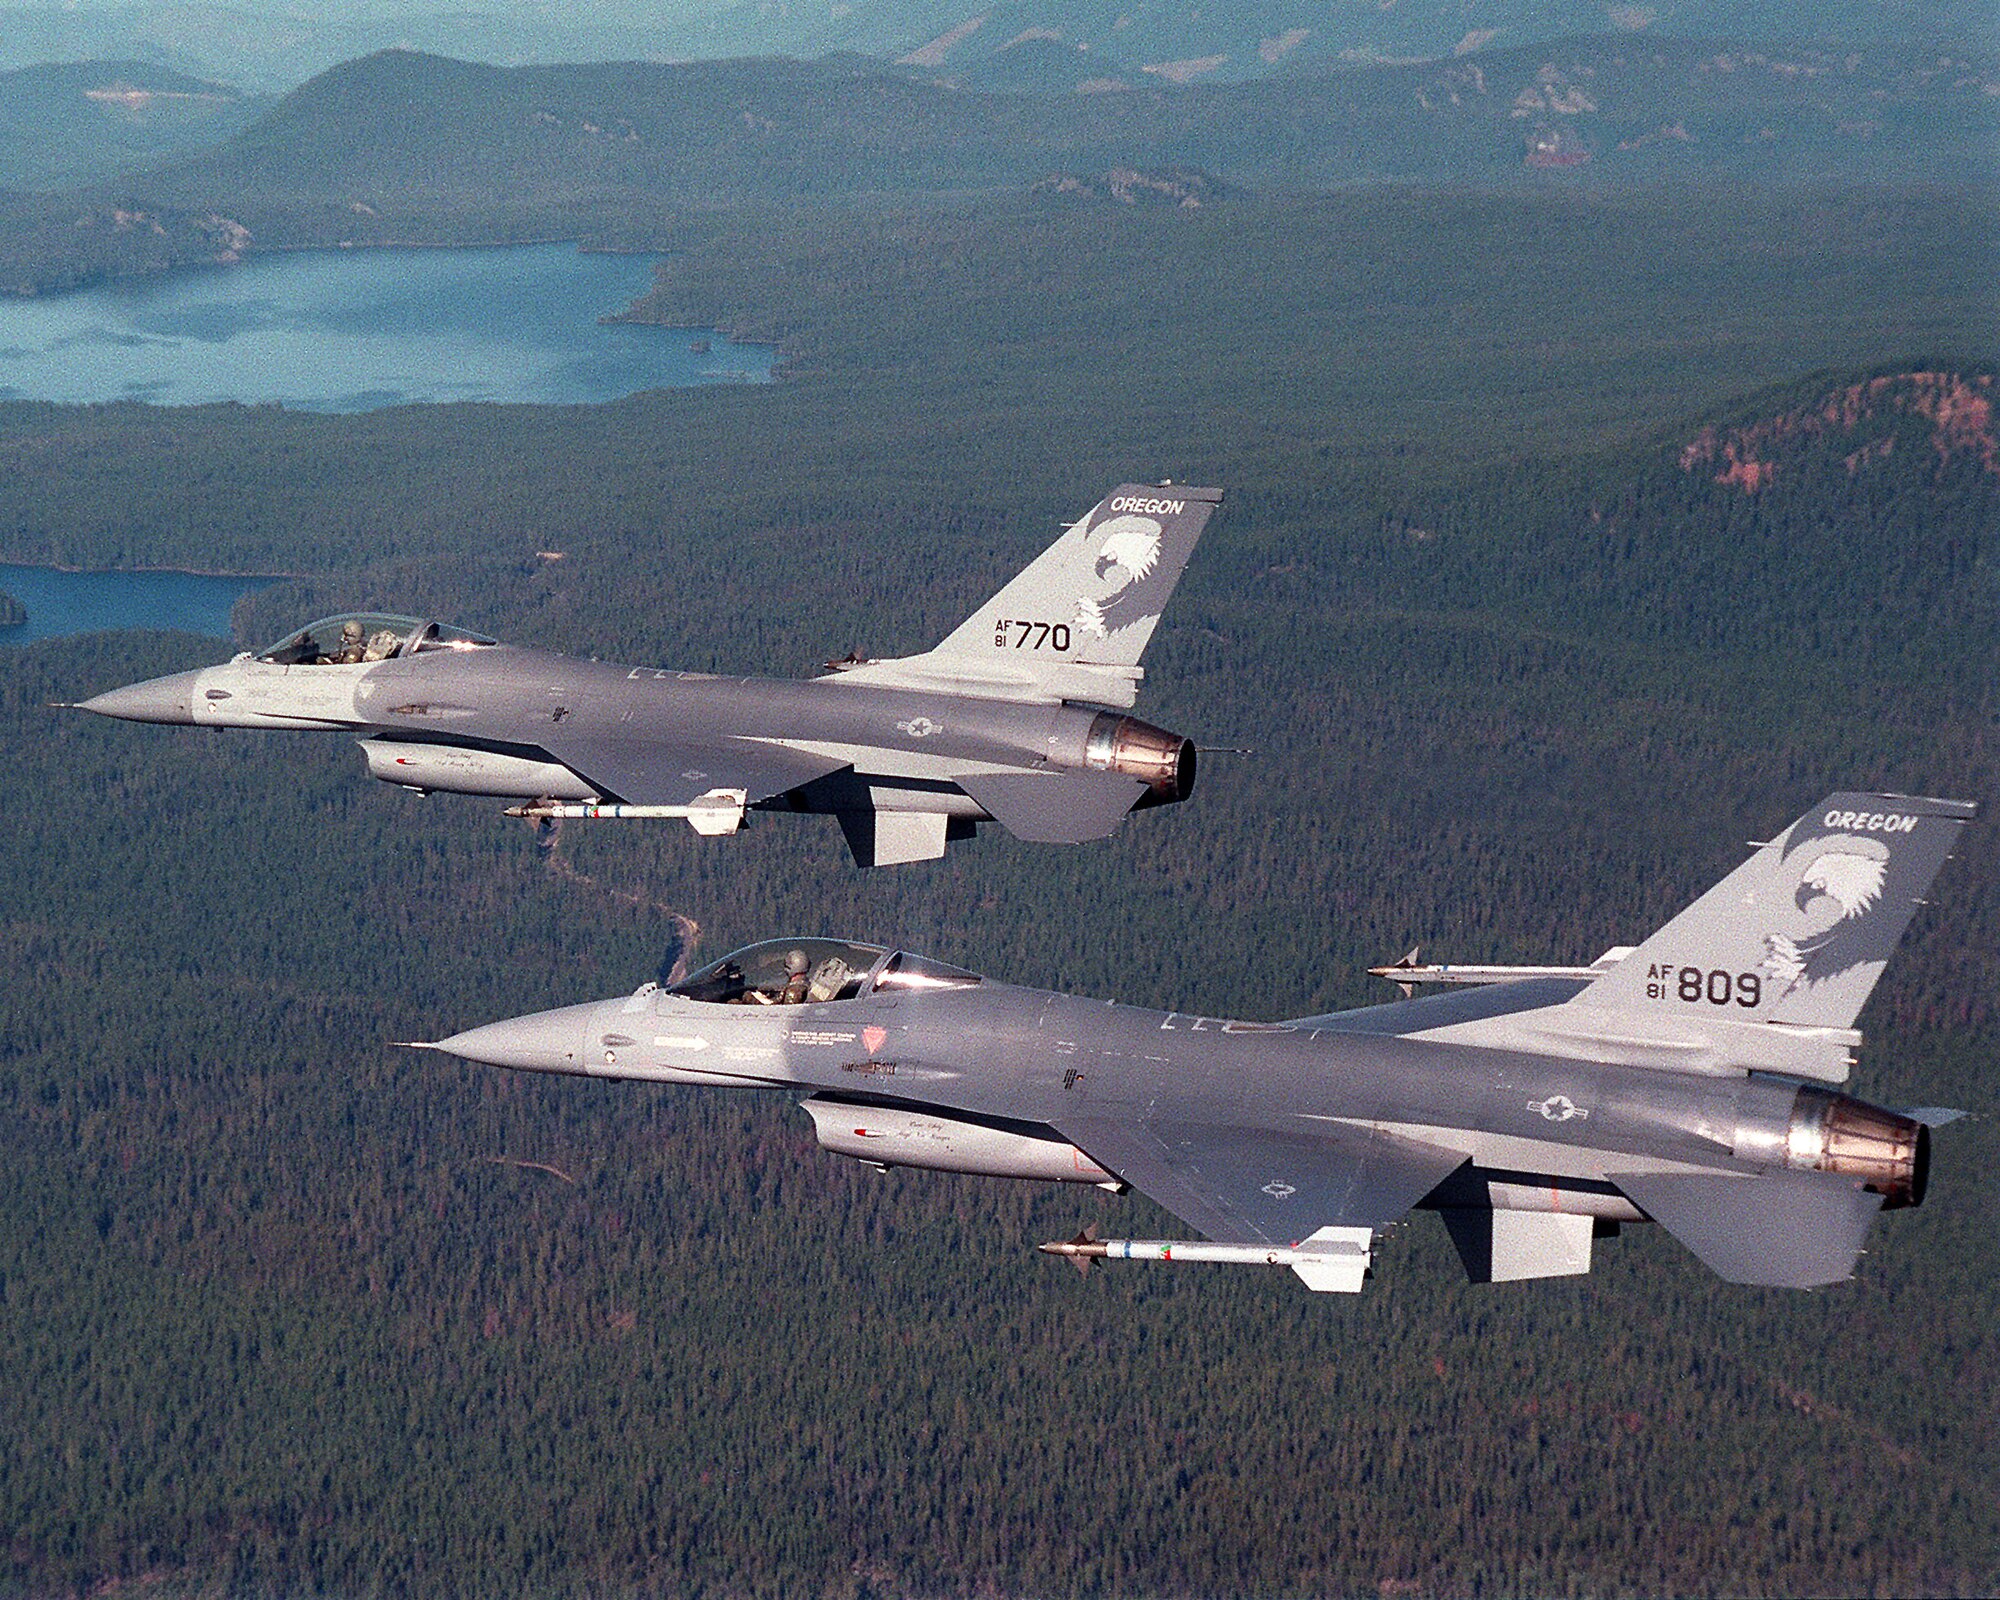 Two Ore. Air National Guard  F-16 Fighting Falcons from the 114th Fighter Squadron fly over Klamath Falls, Ore.  (U.S. Air Force photo by Unknown, Released)  